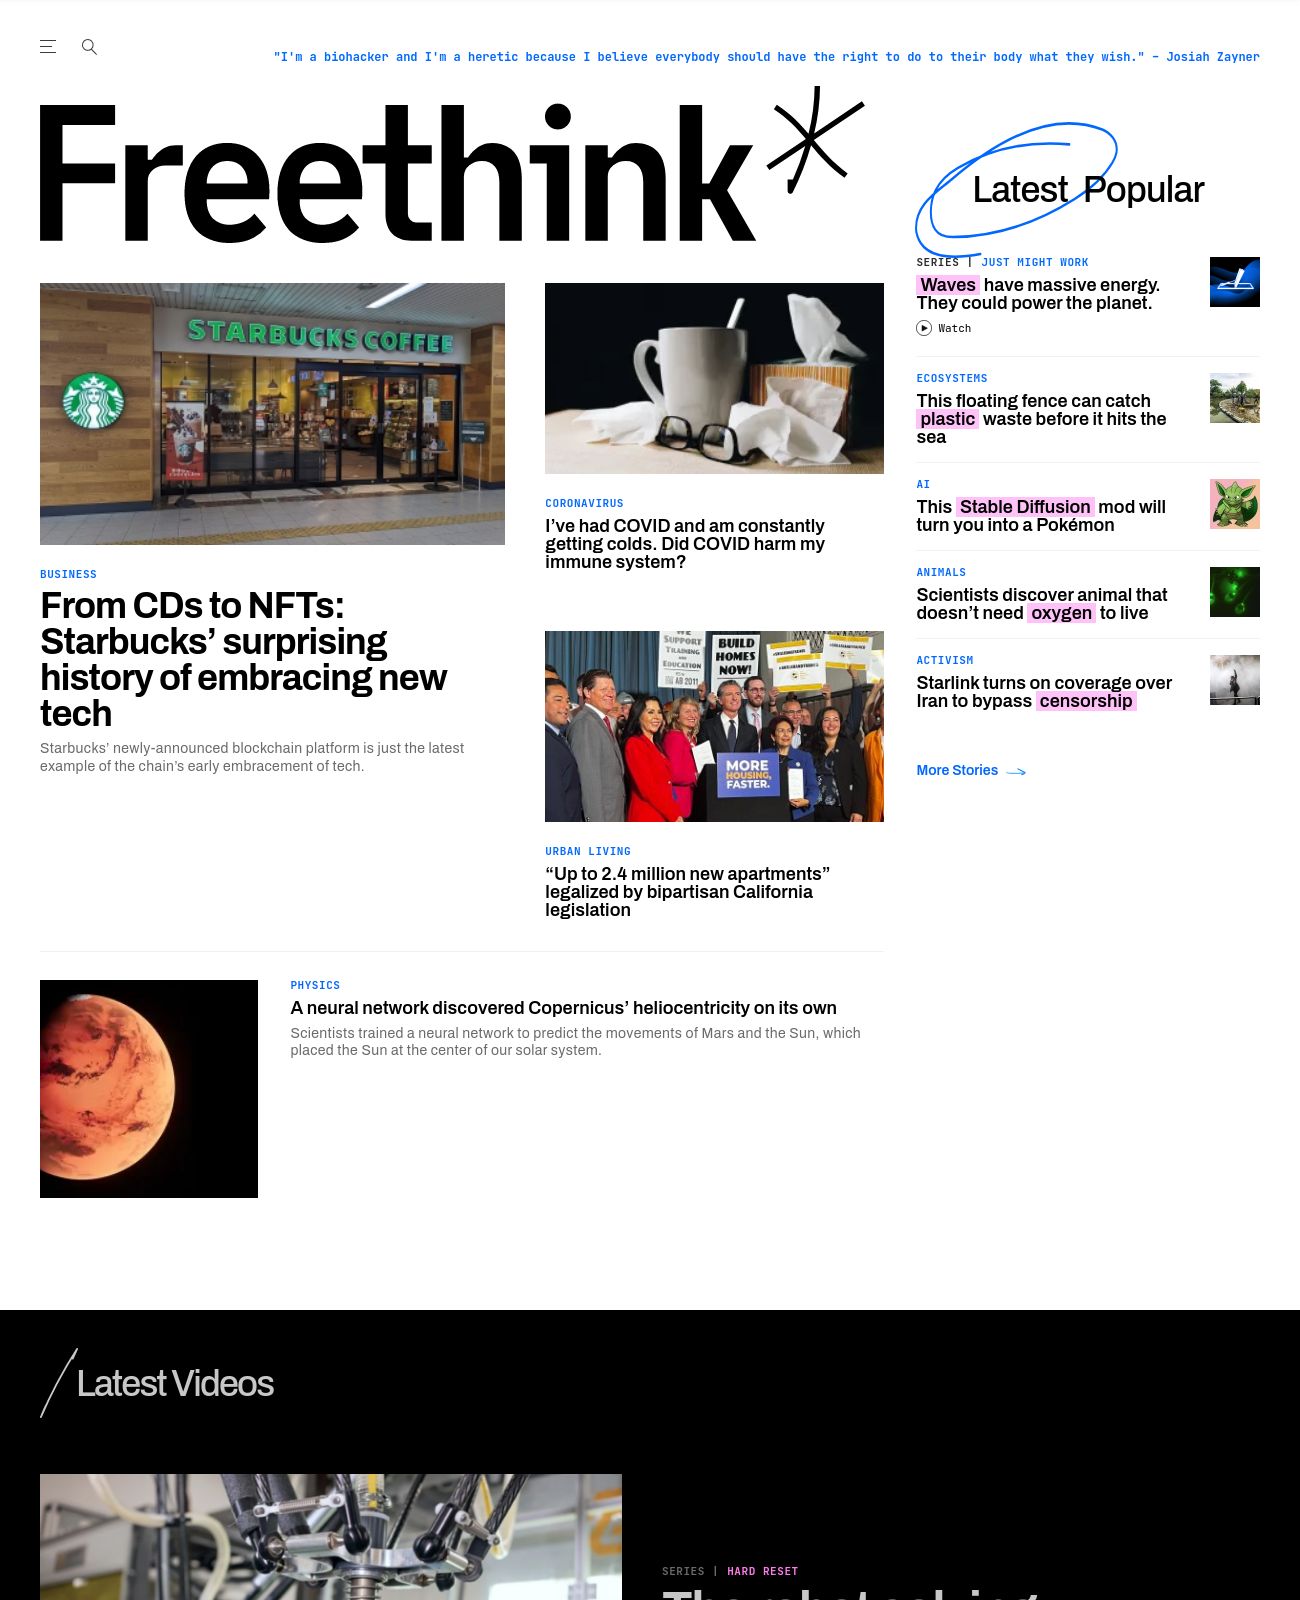 Freethink at 2022-09-30 11:31:19-07:00 local time